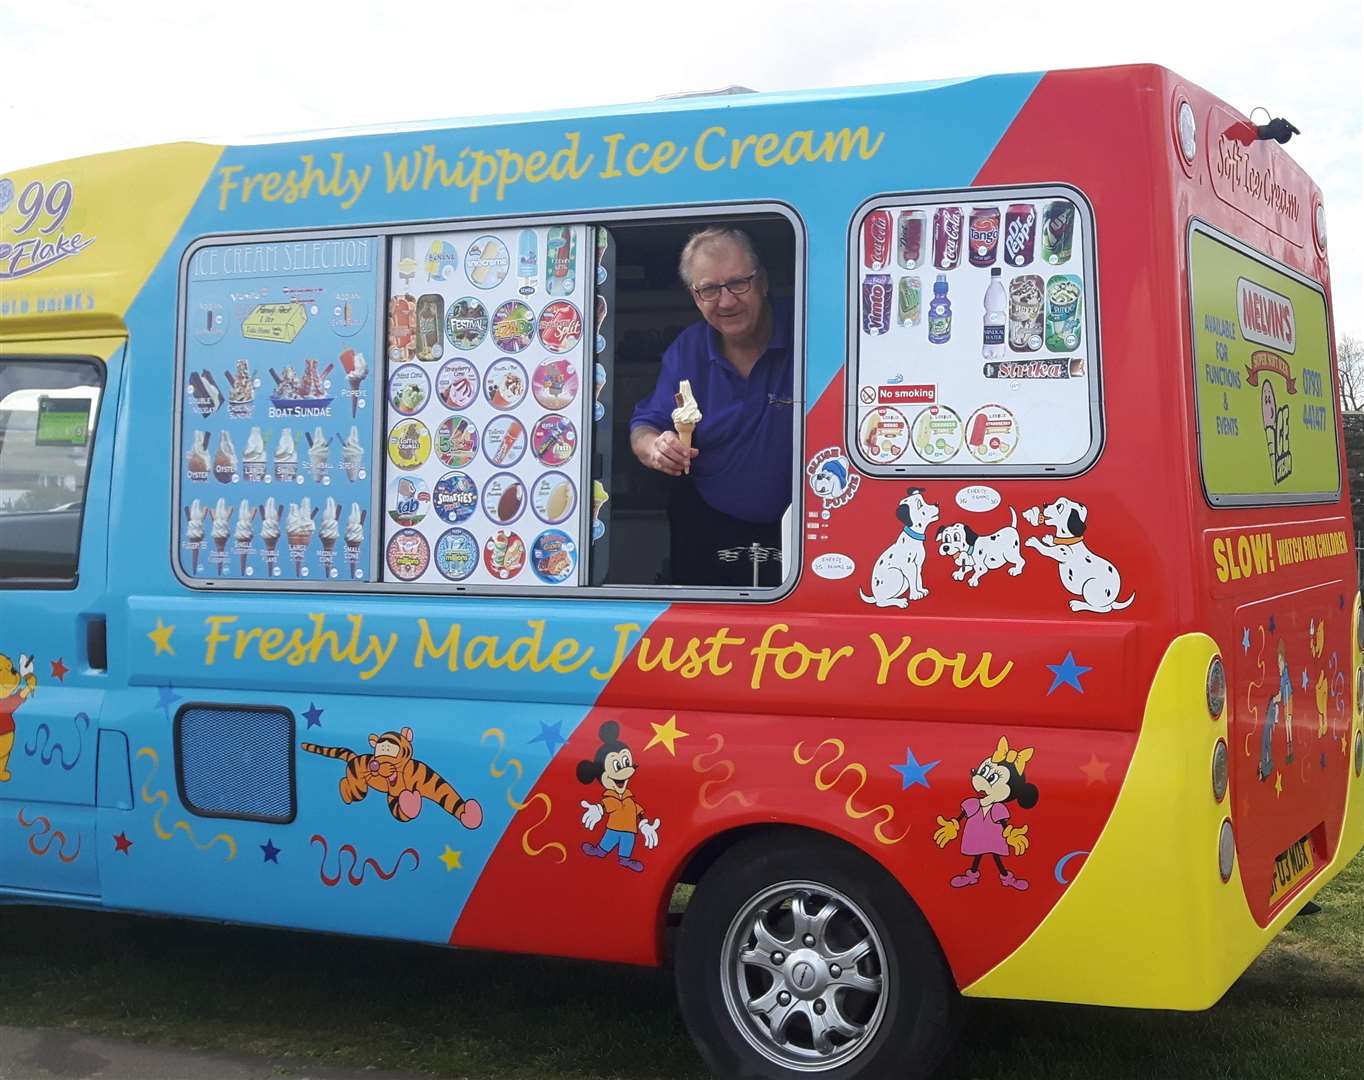 Melvin Nobbs, 63, has been involved in selling ice cream for 37 years